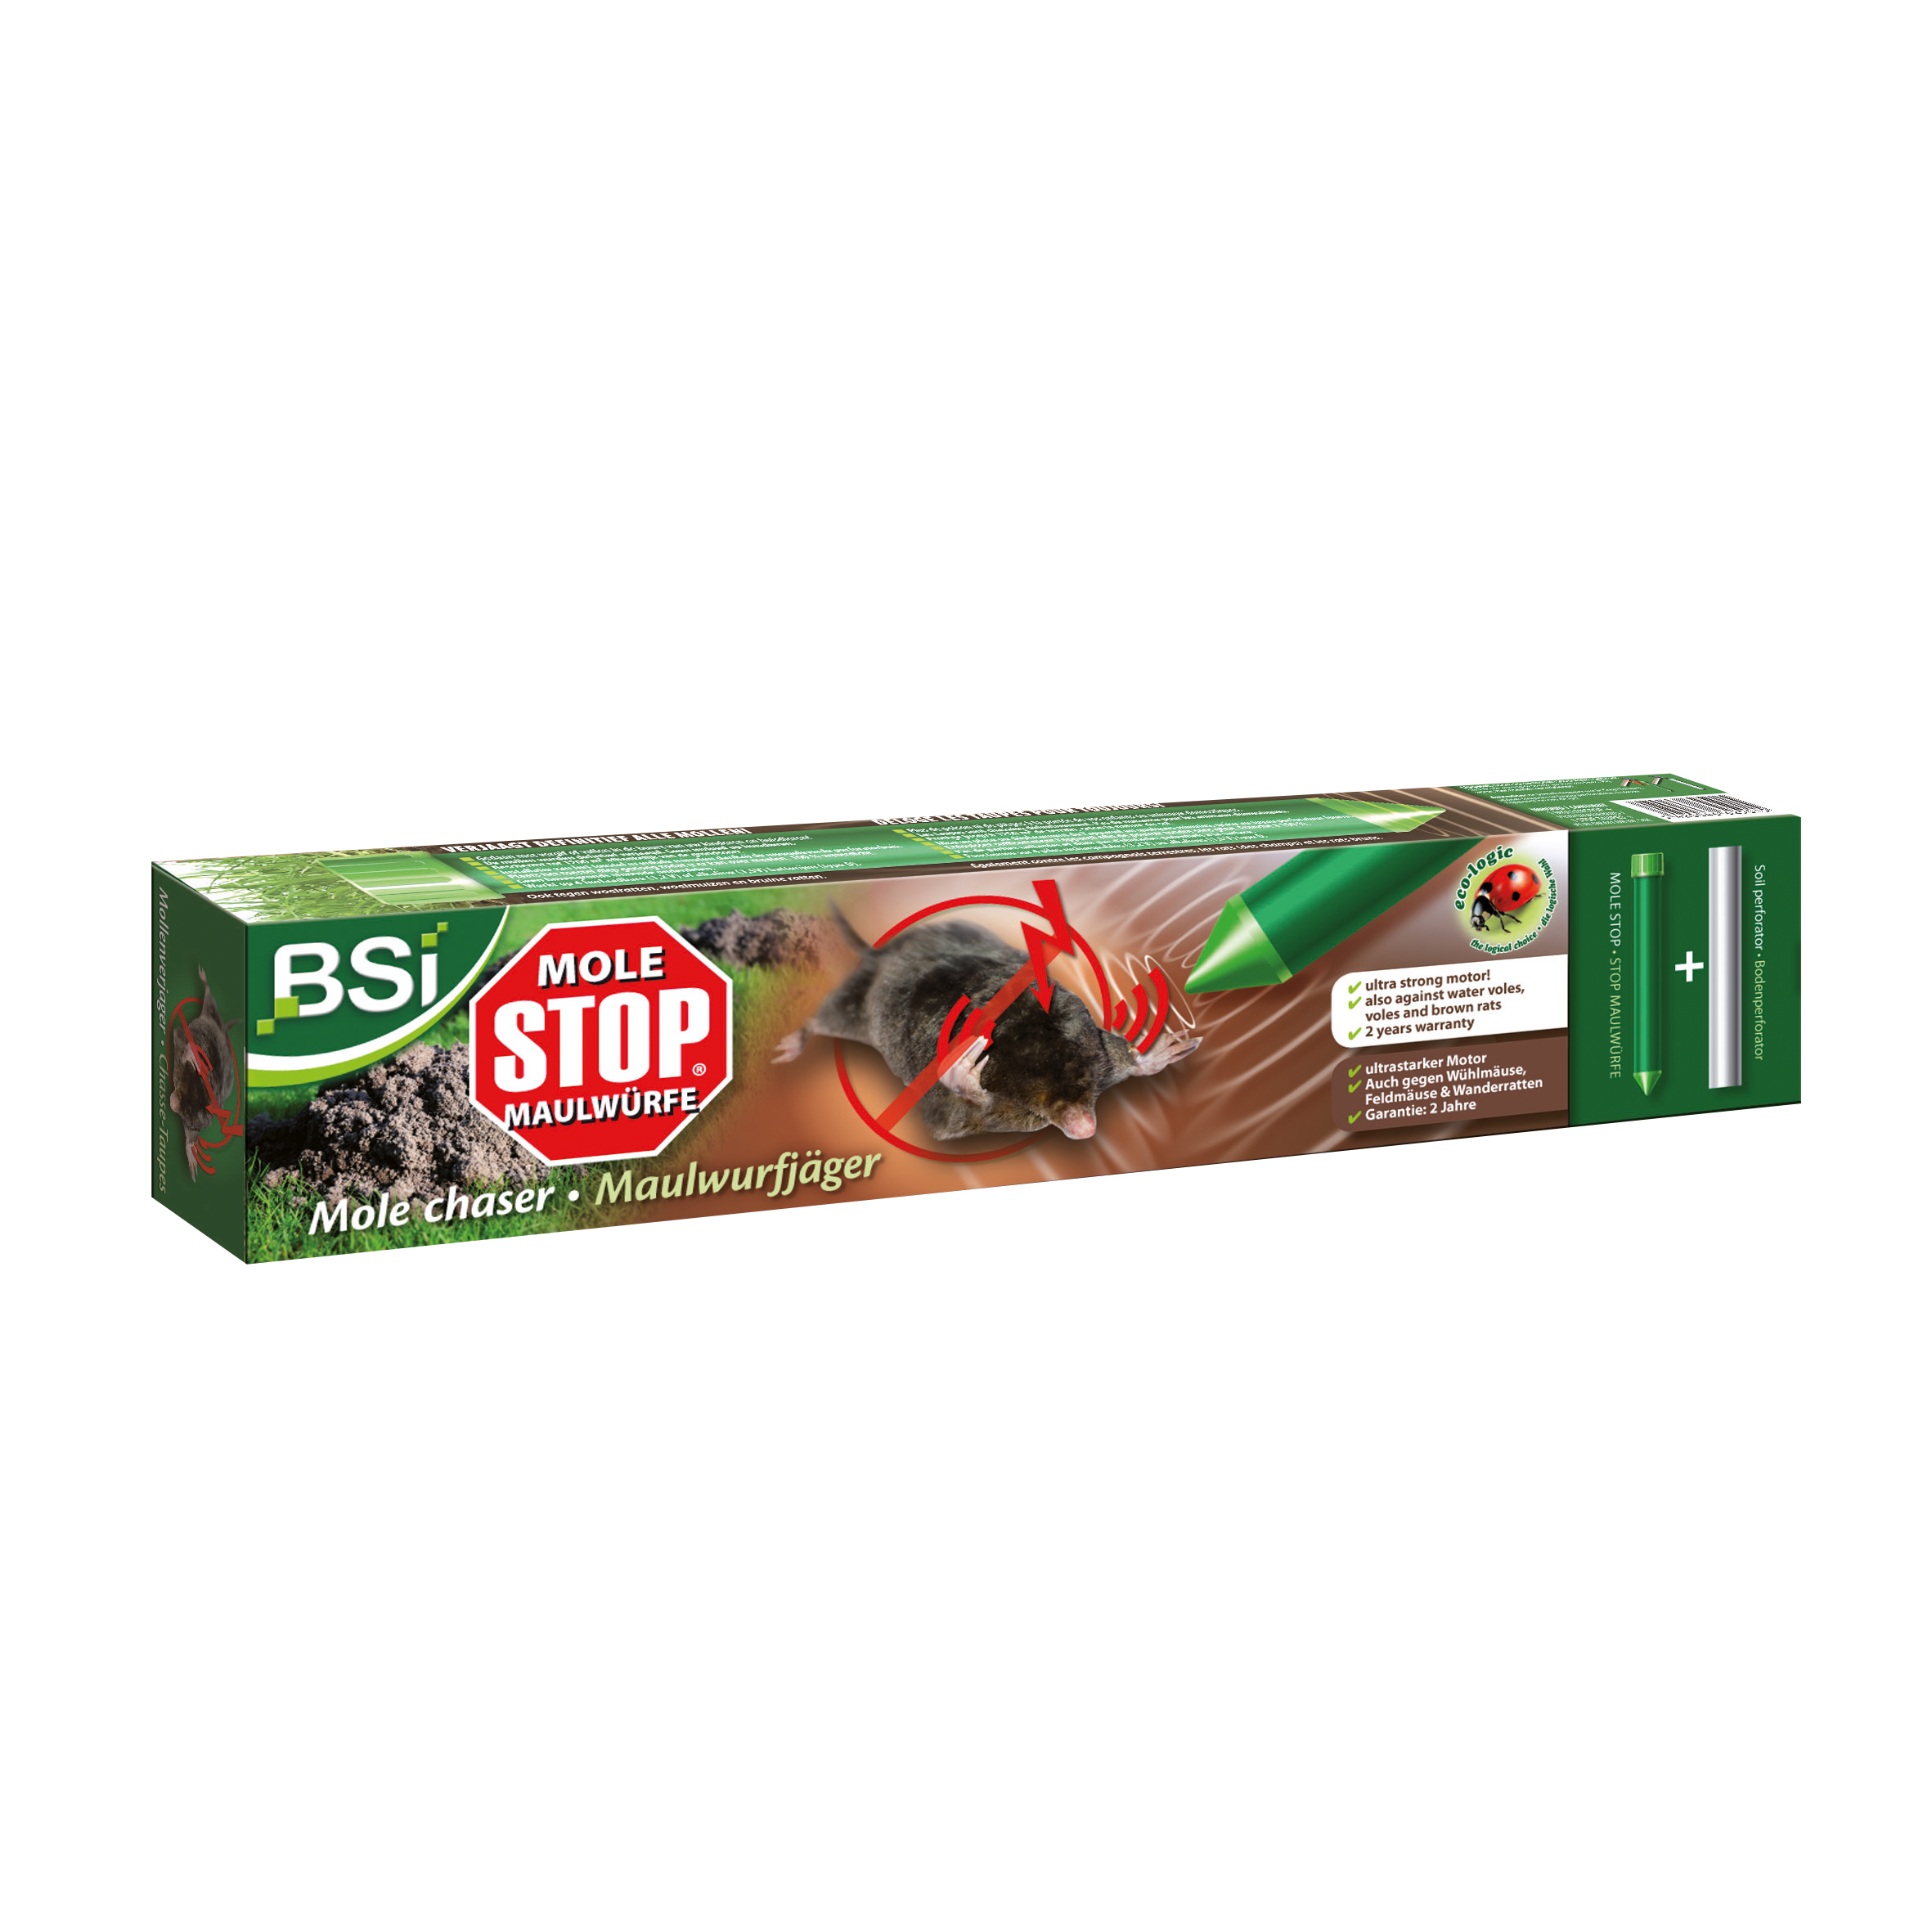 Stop-taupes chasse-taupes image